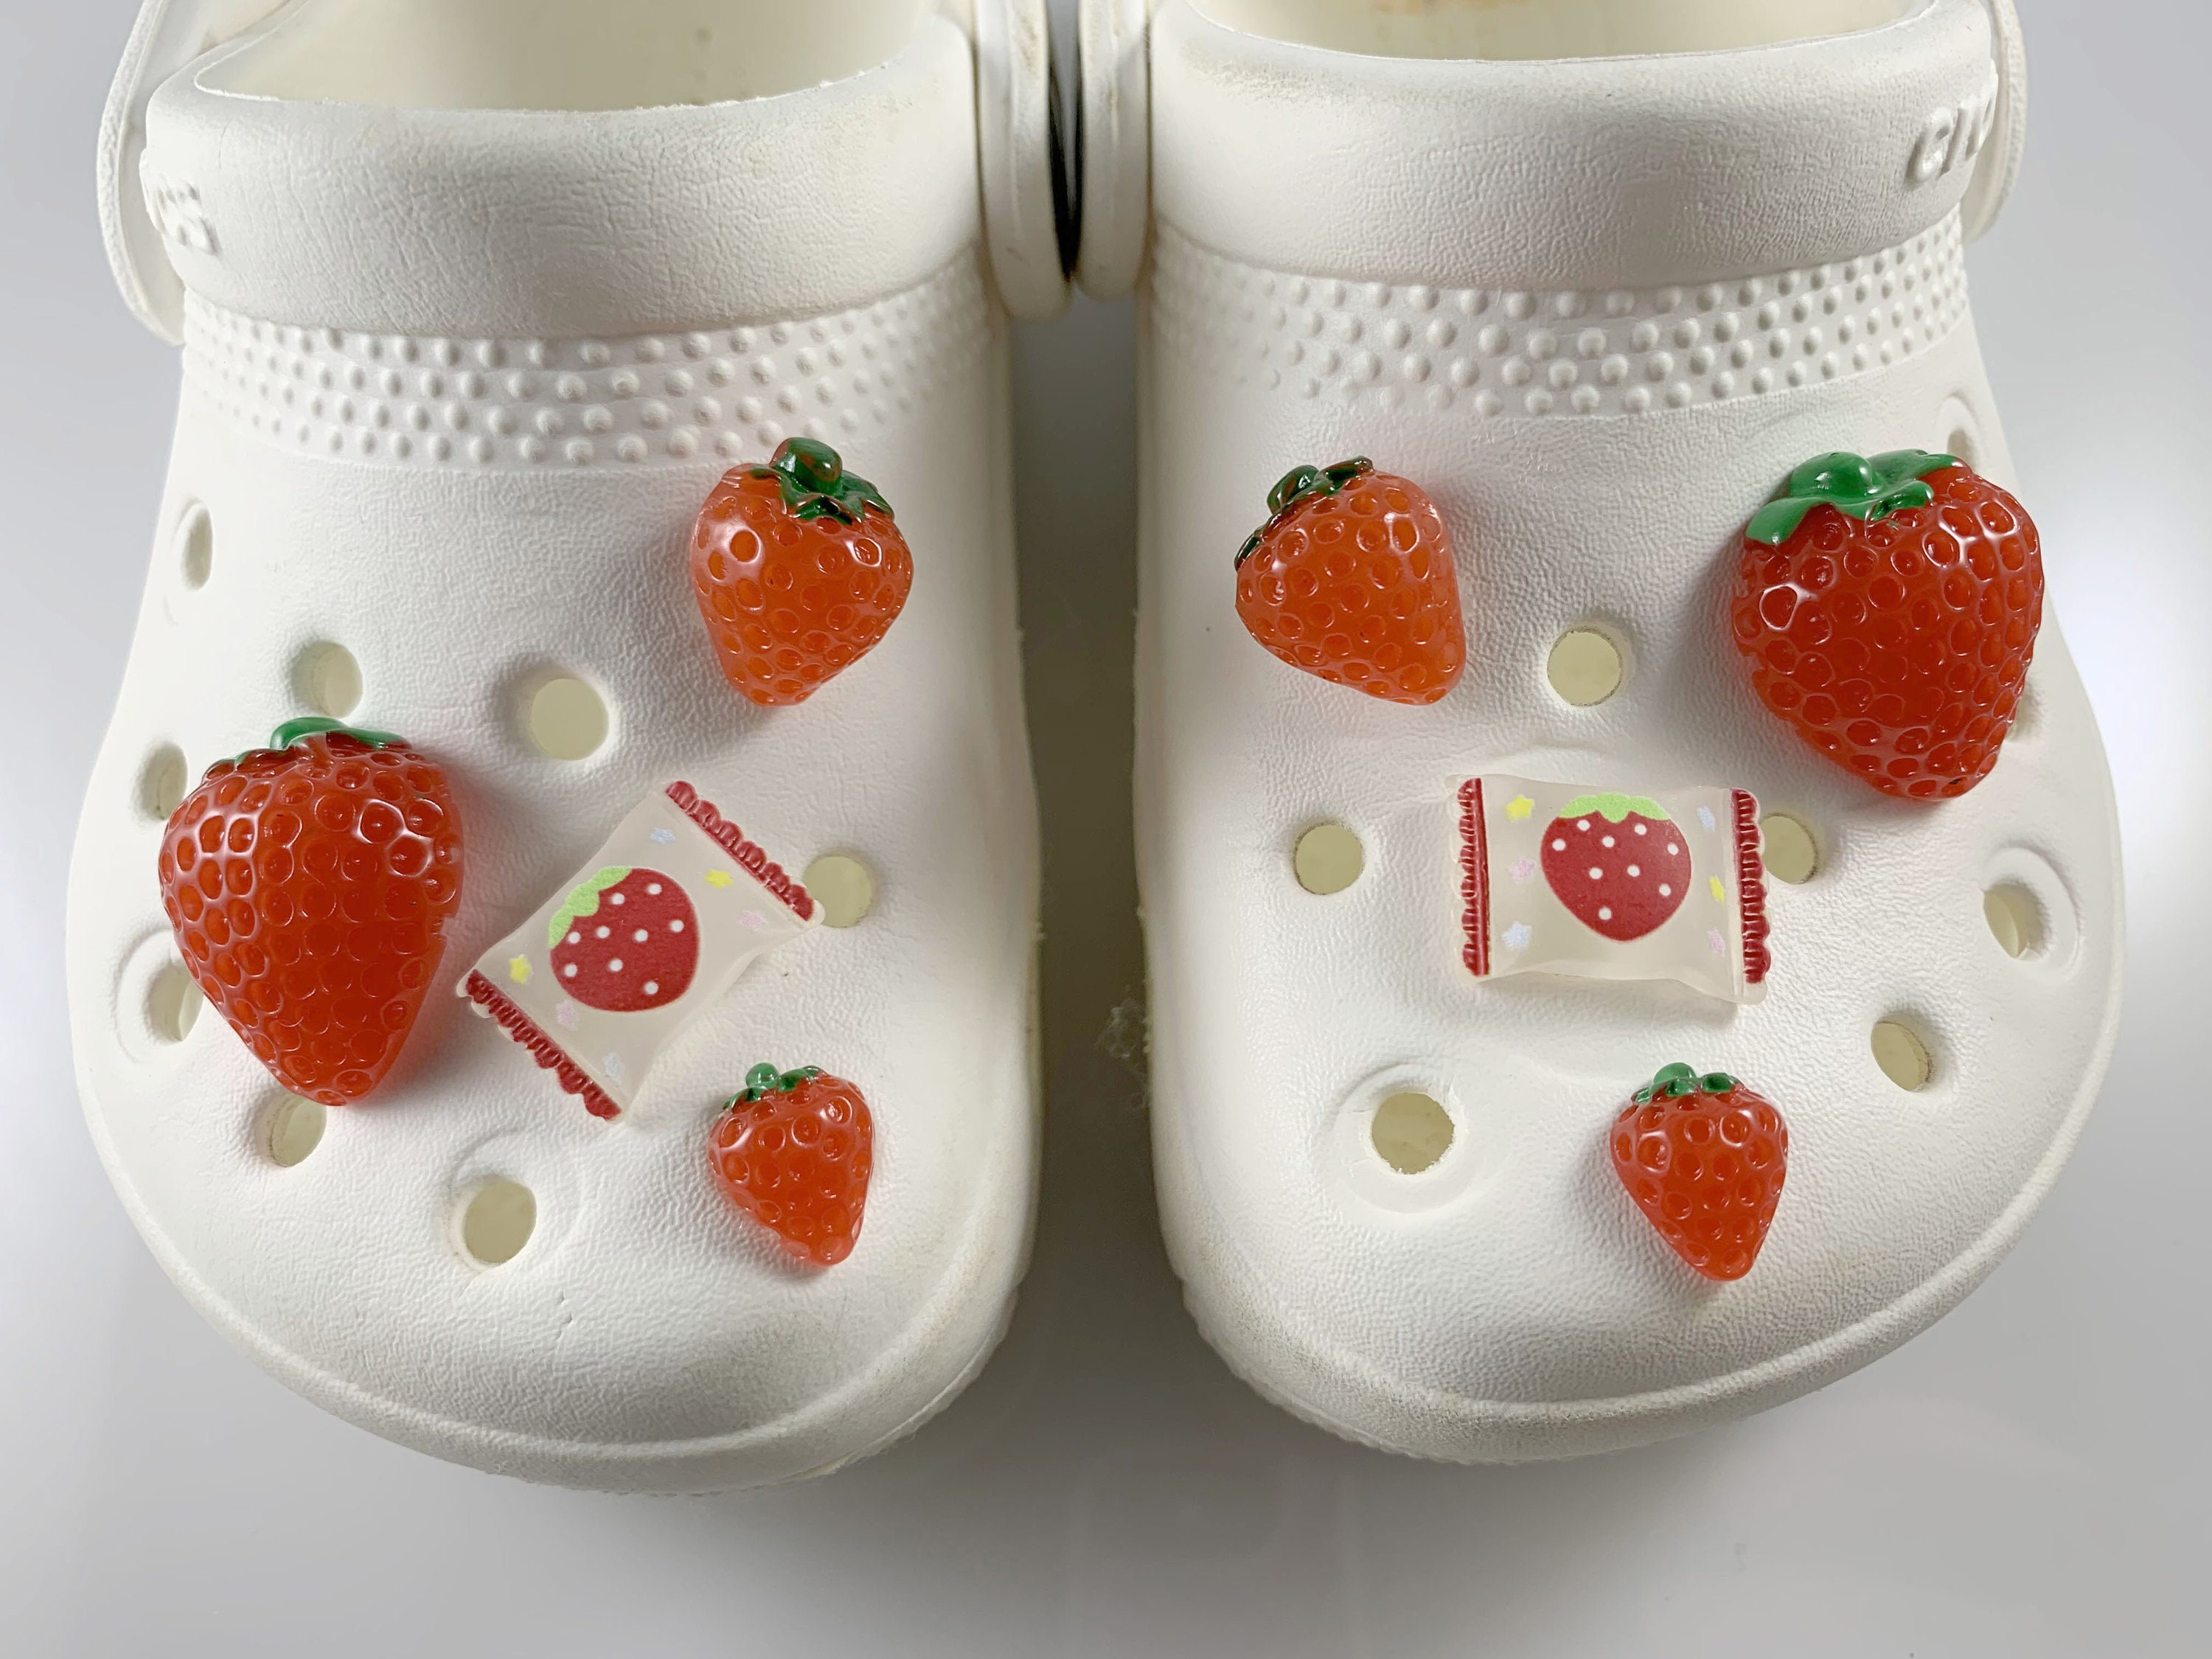 Dropshipping Fruit Plant Shoe Charms PVC Clover Rose Durian Deaigner Shoes  Sandals Accessories for Croc JIBZ Kids Party Gifts